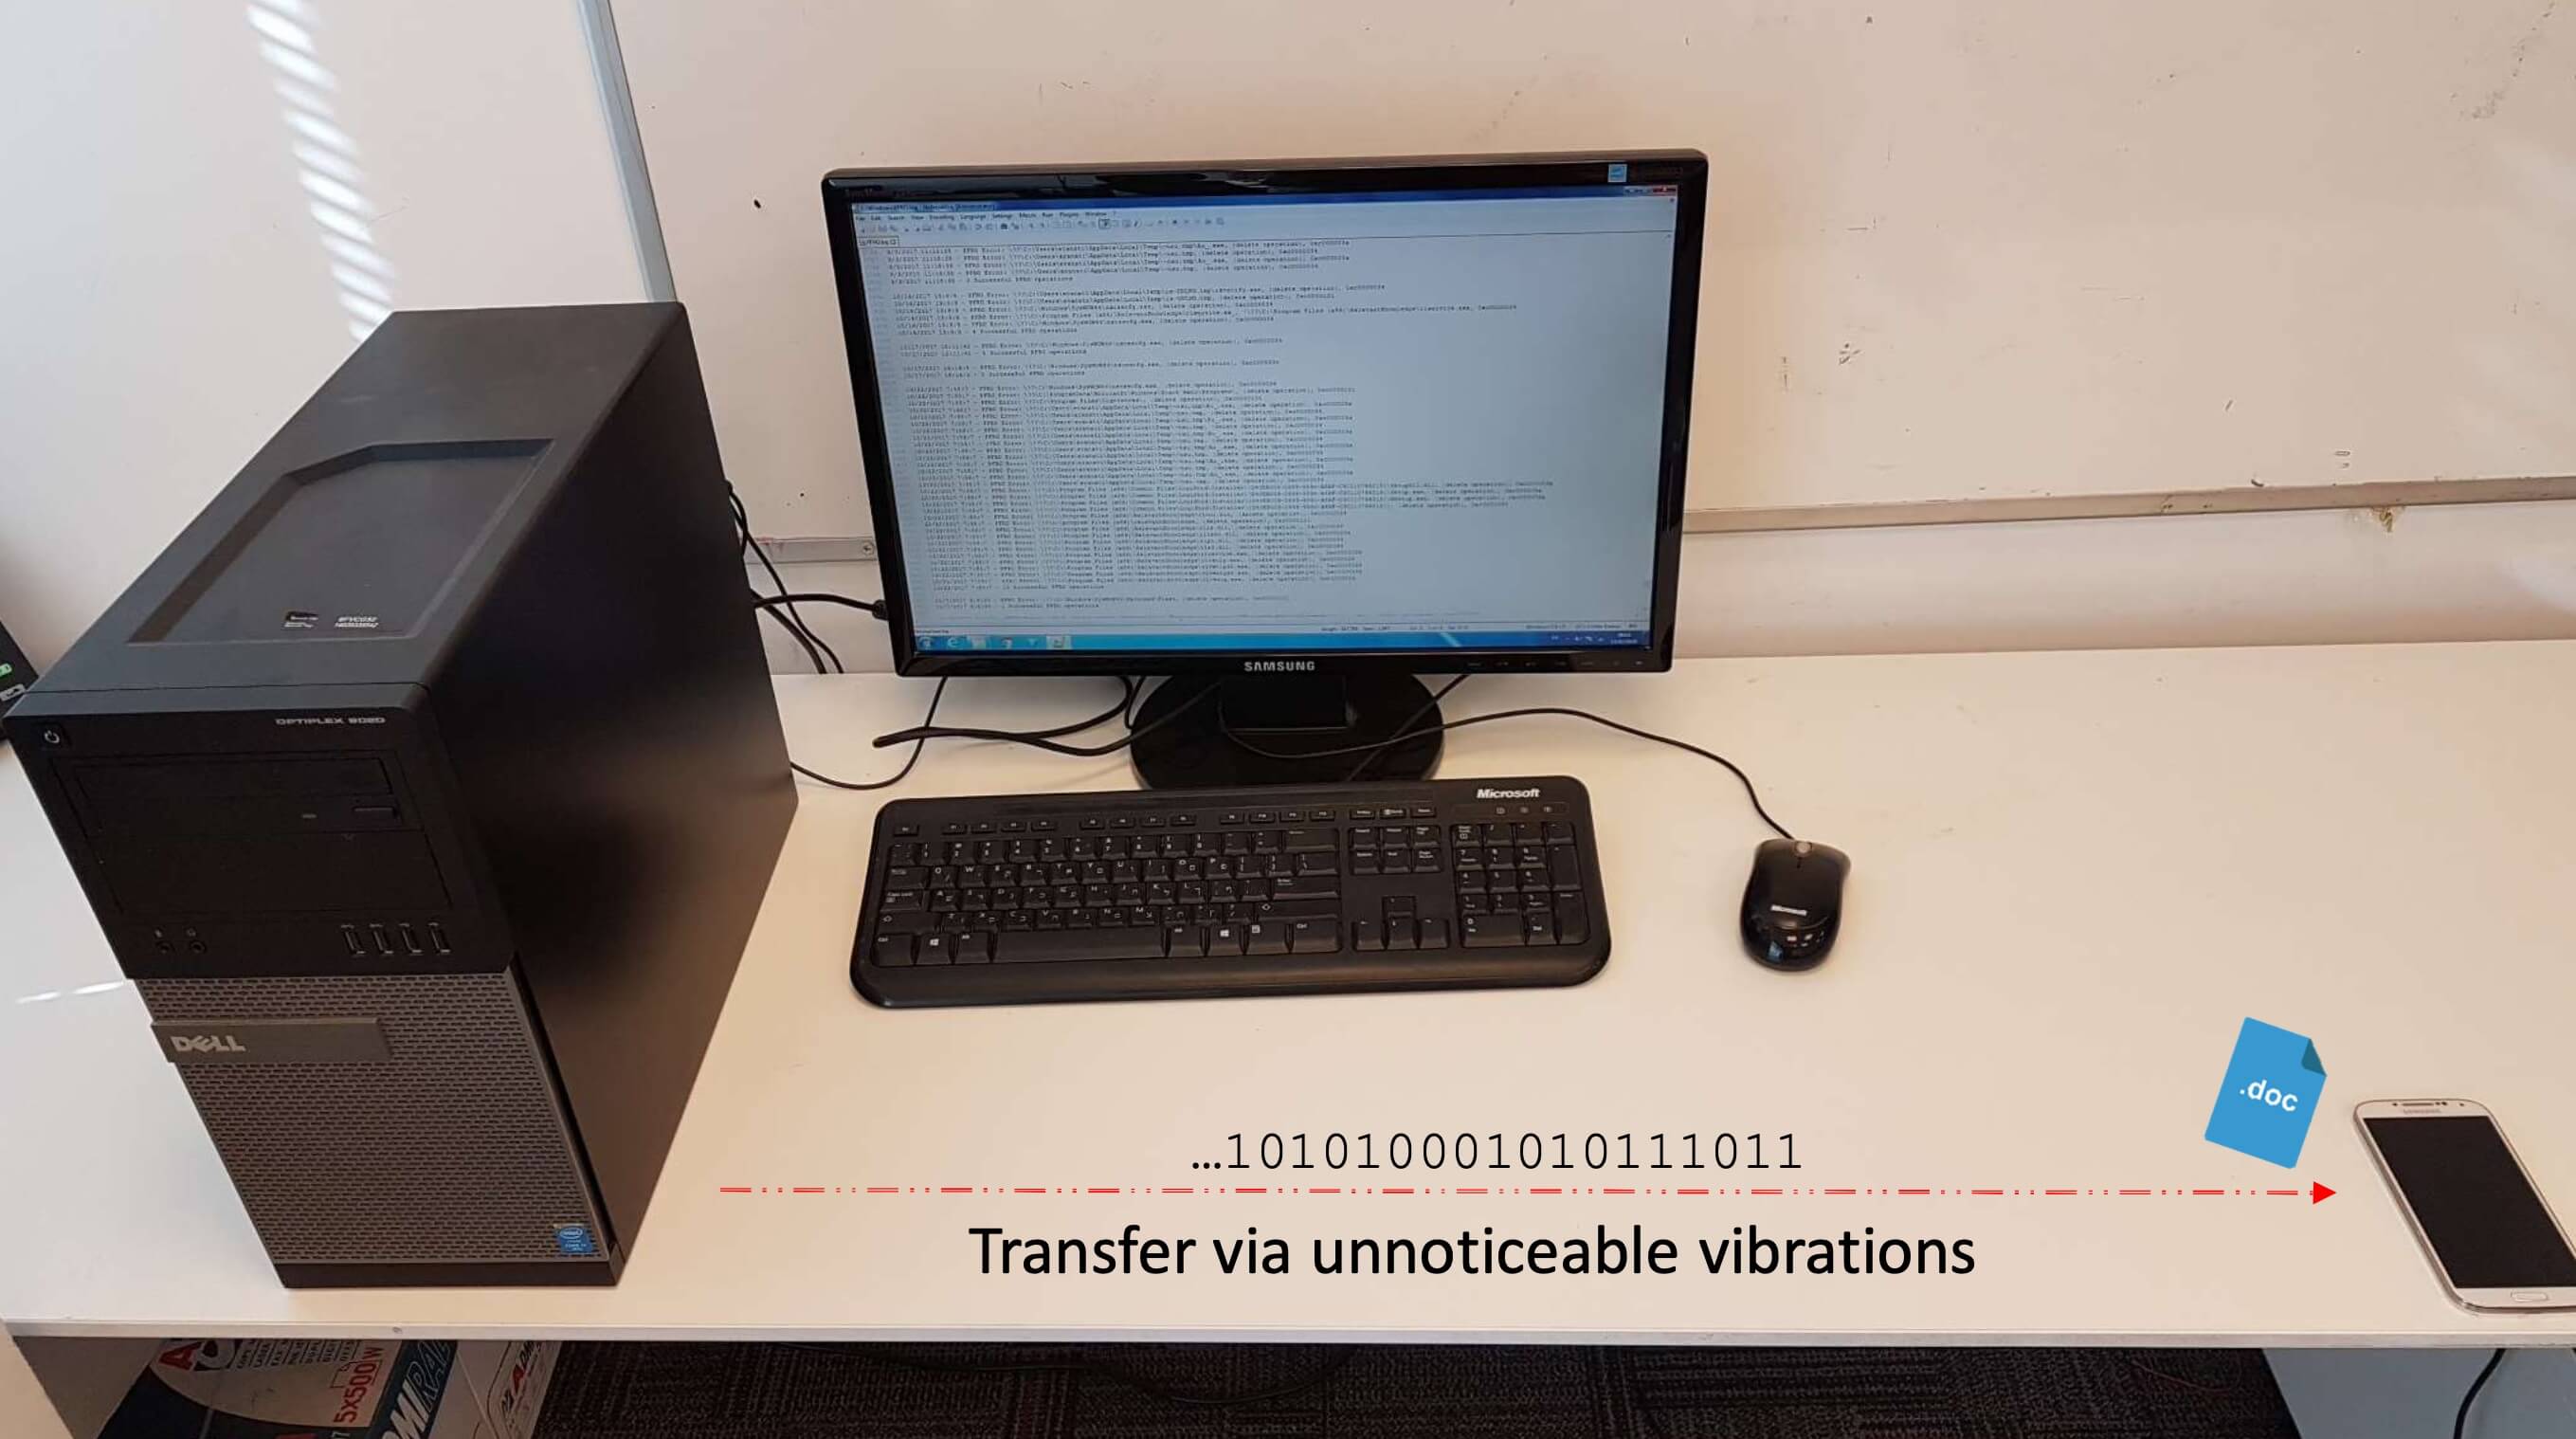 Israeli researchers show you can steal data from a PC using fan vibrations and a smartphone